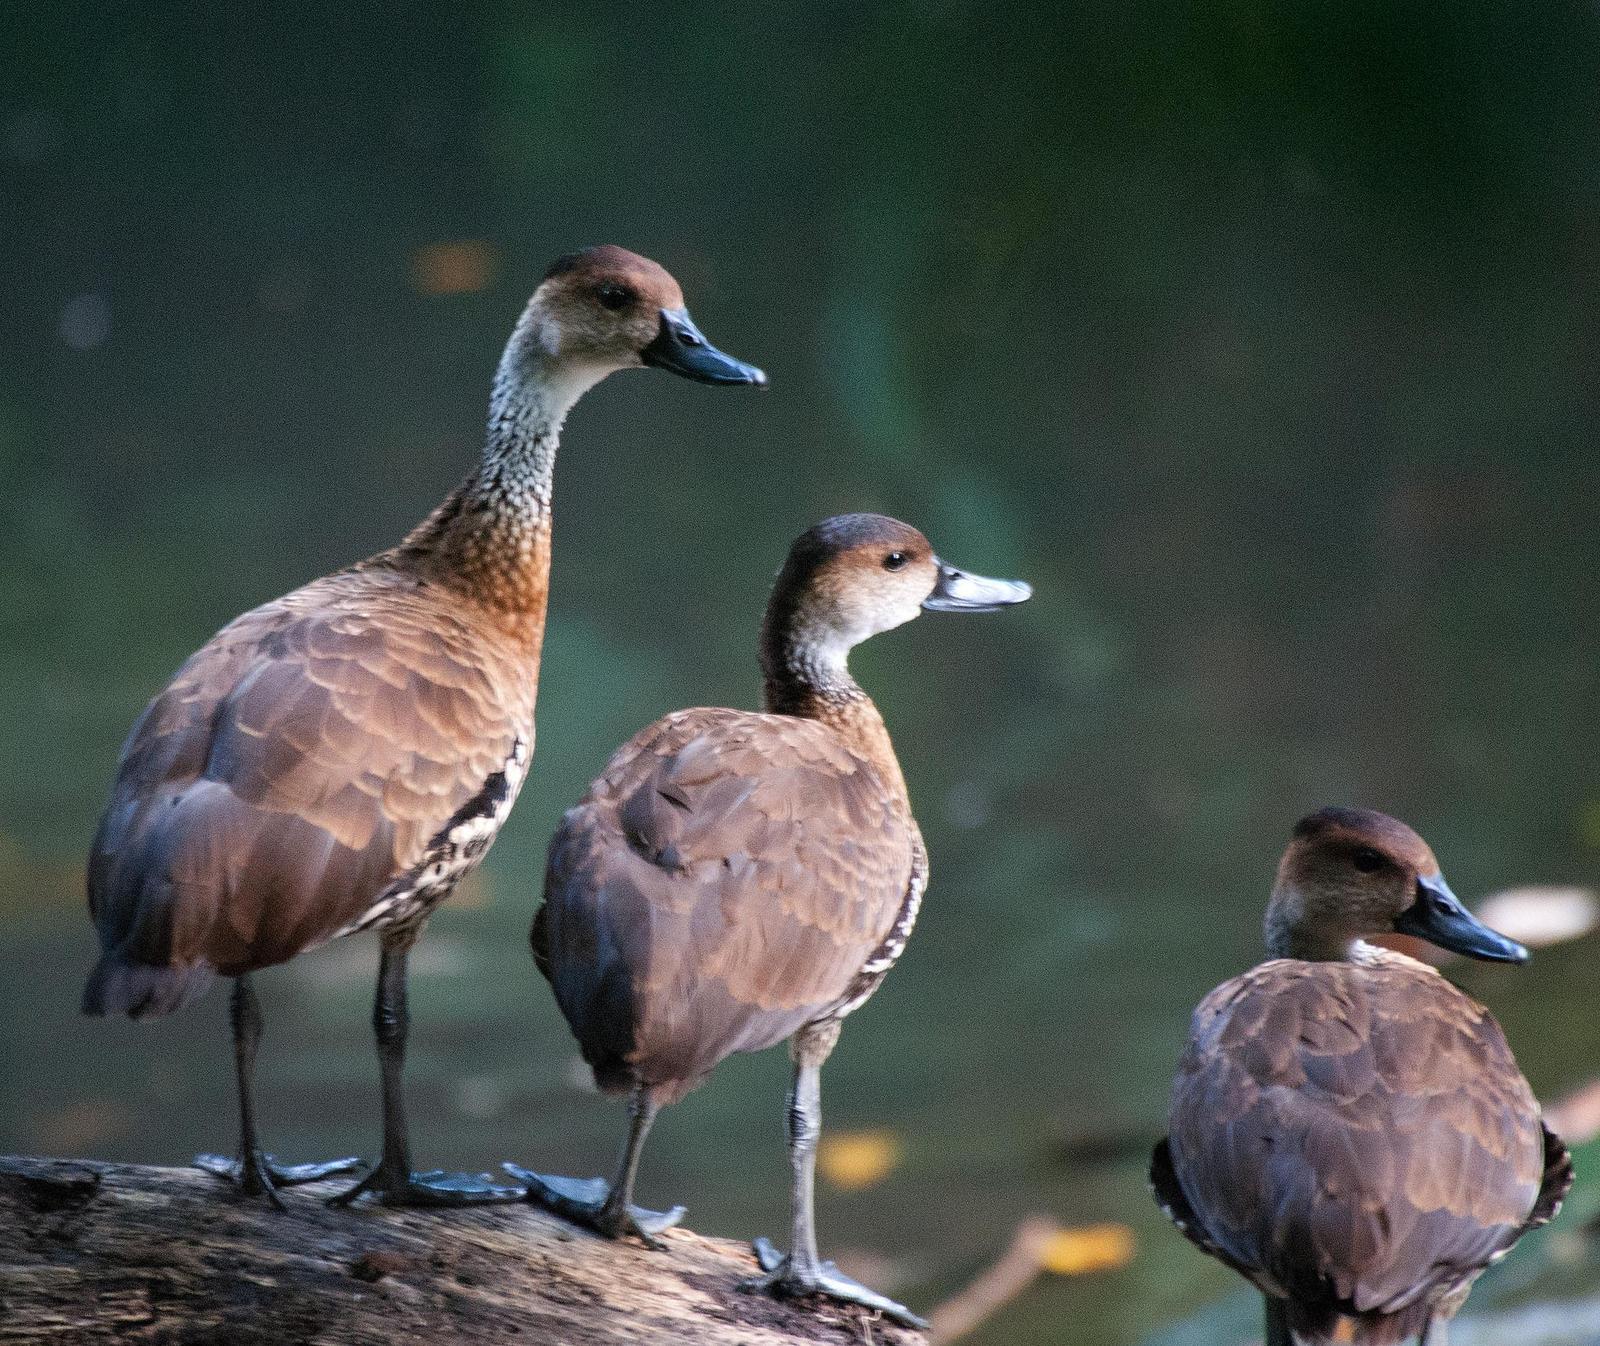 West Indian Whistling-Duck Photo by Carol Foil